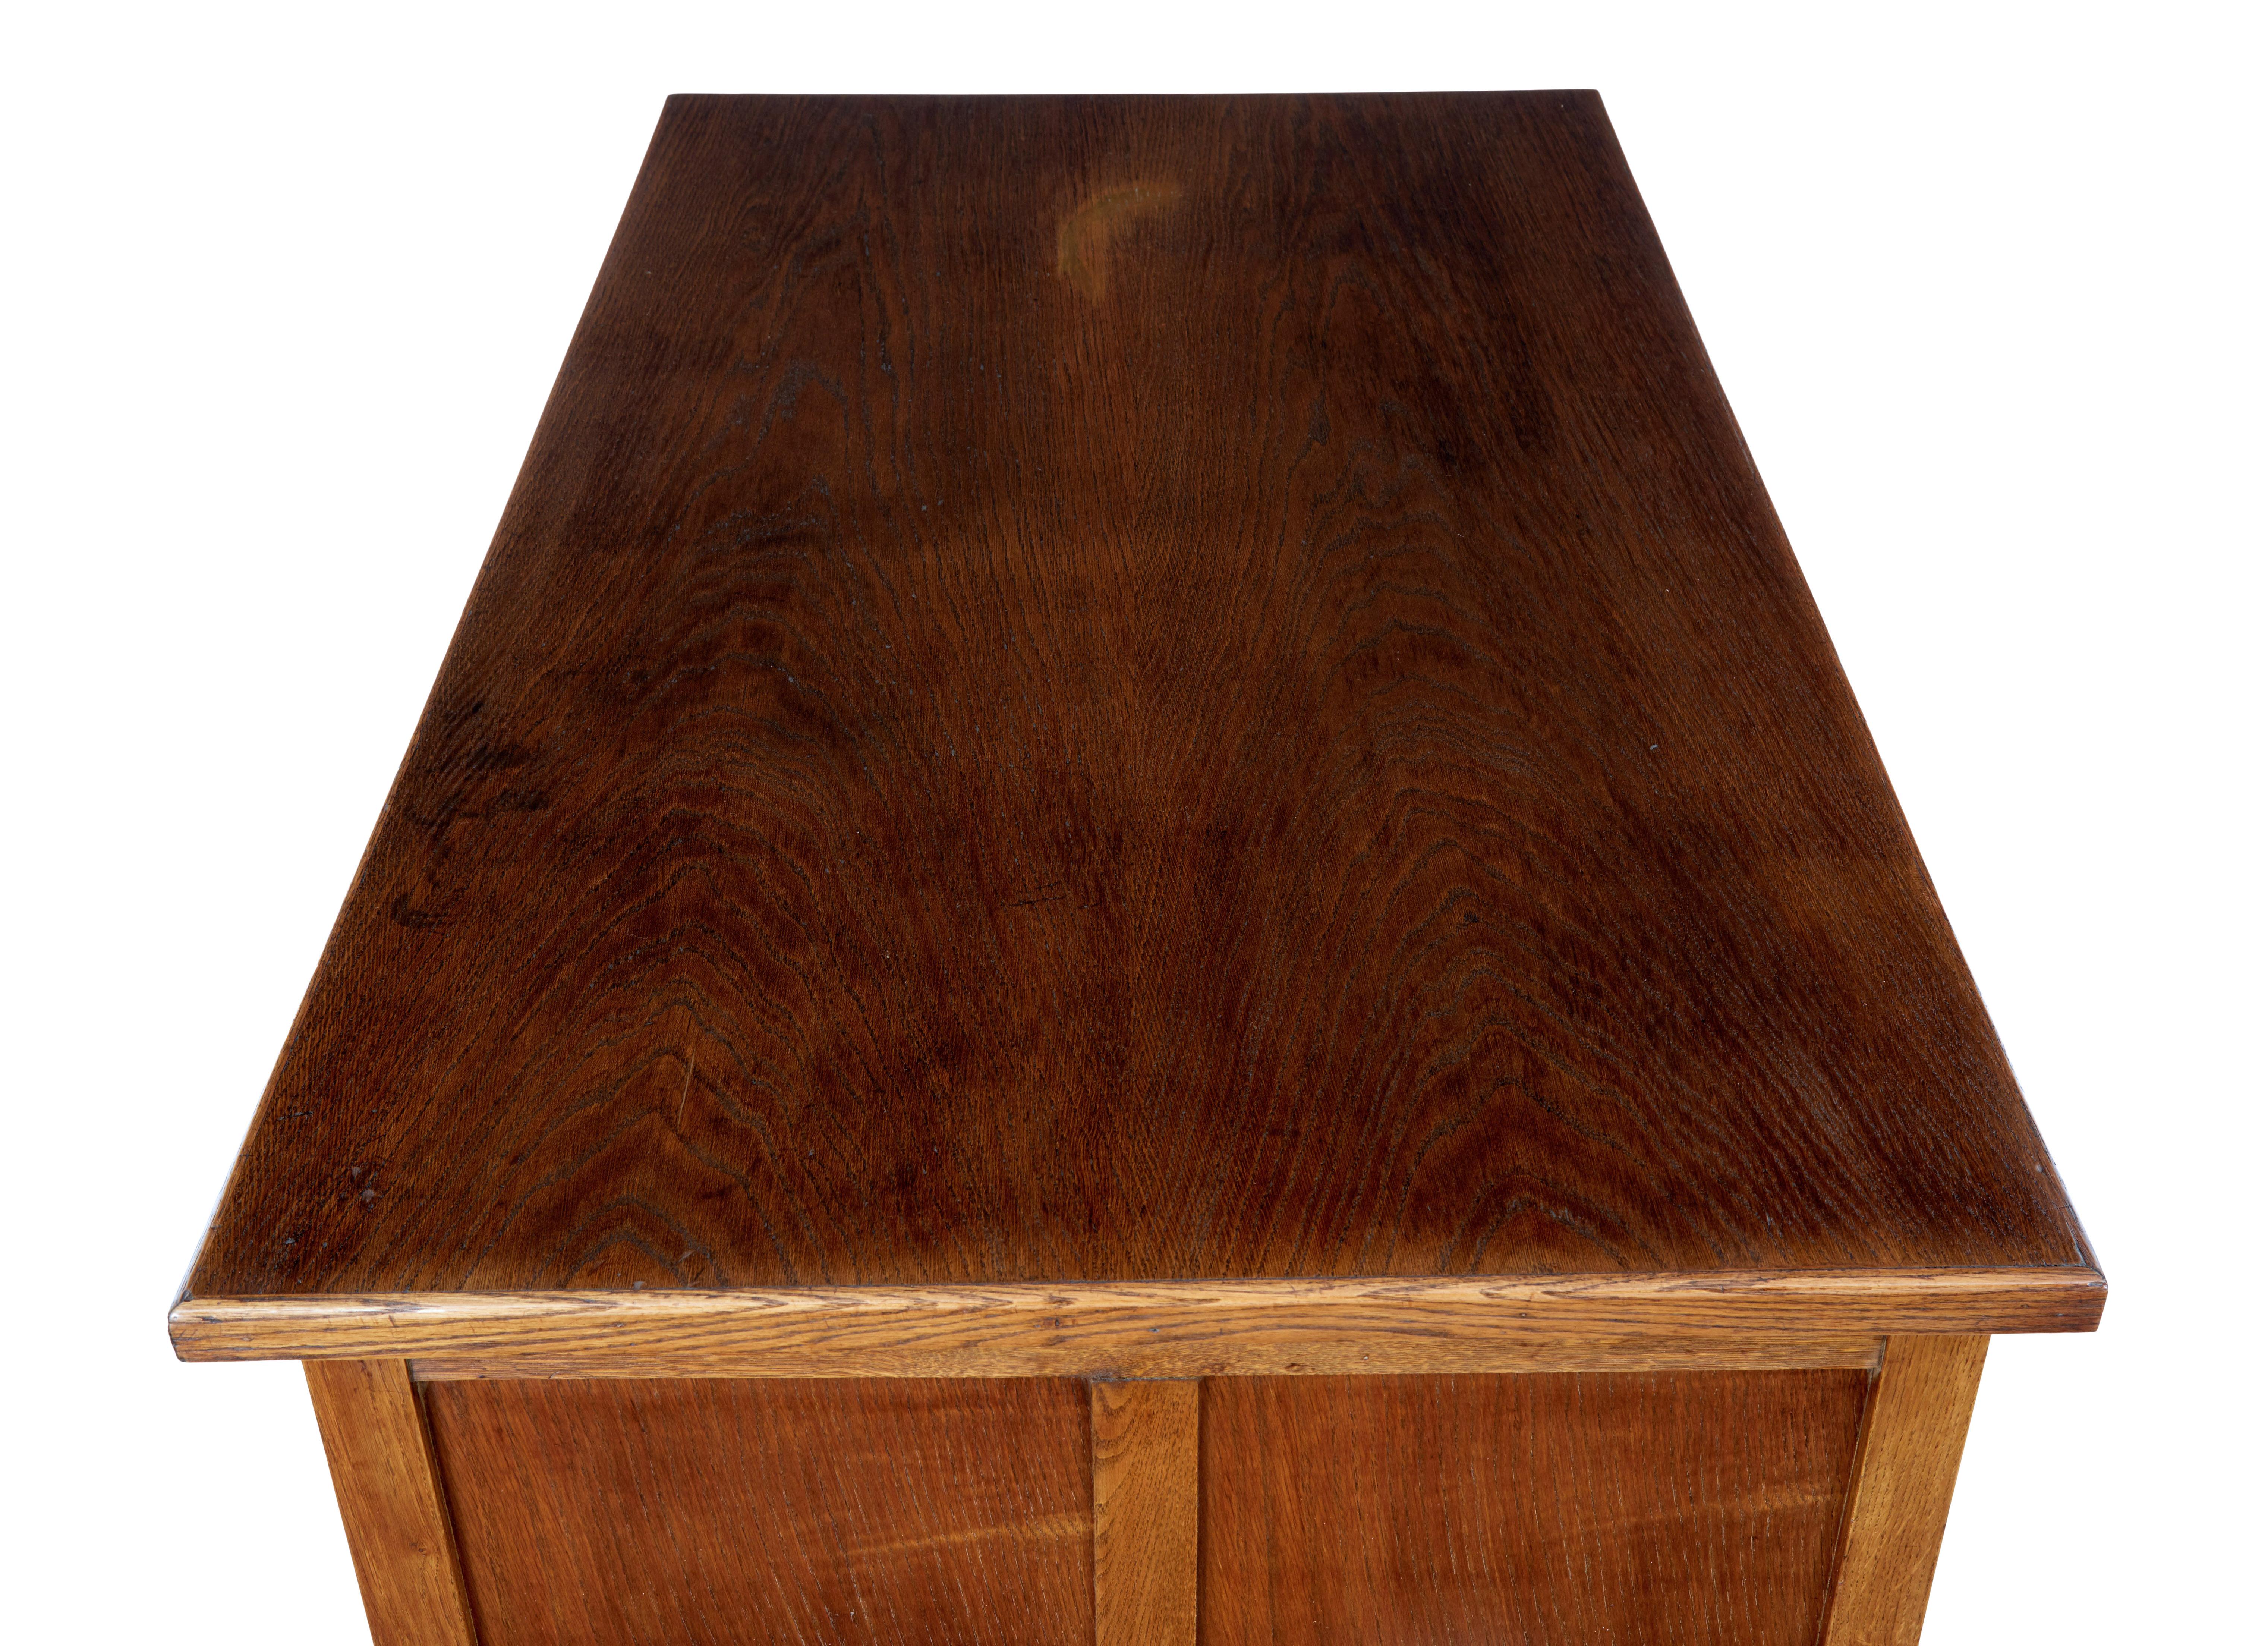 English Mid-20th Century oak desk circa 1940.

Here we have an english made desk which was made either side of the second world war, making it difficult to date. Made during a time when wood was in short supply due to its metalwork drawer